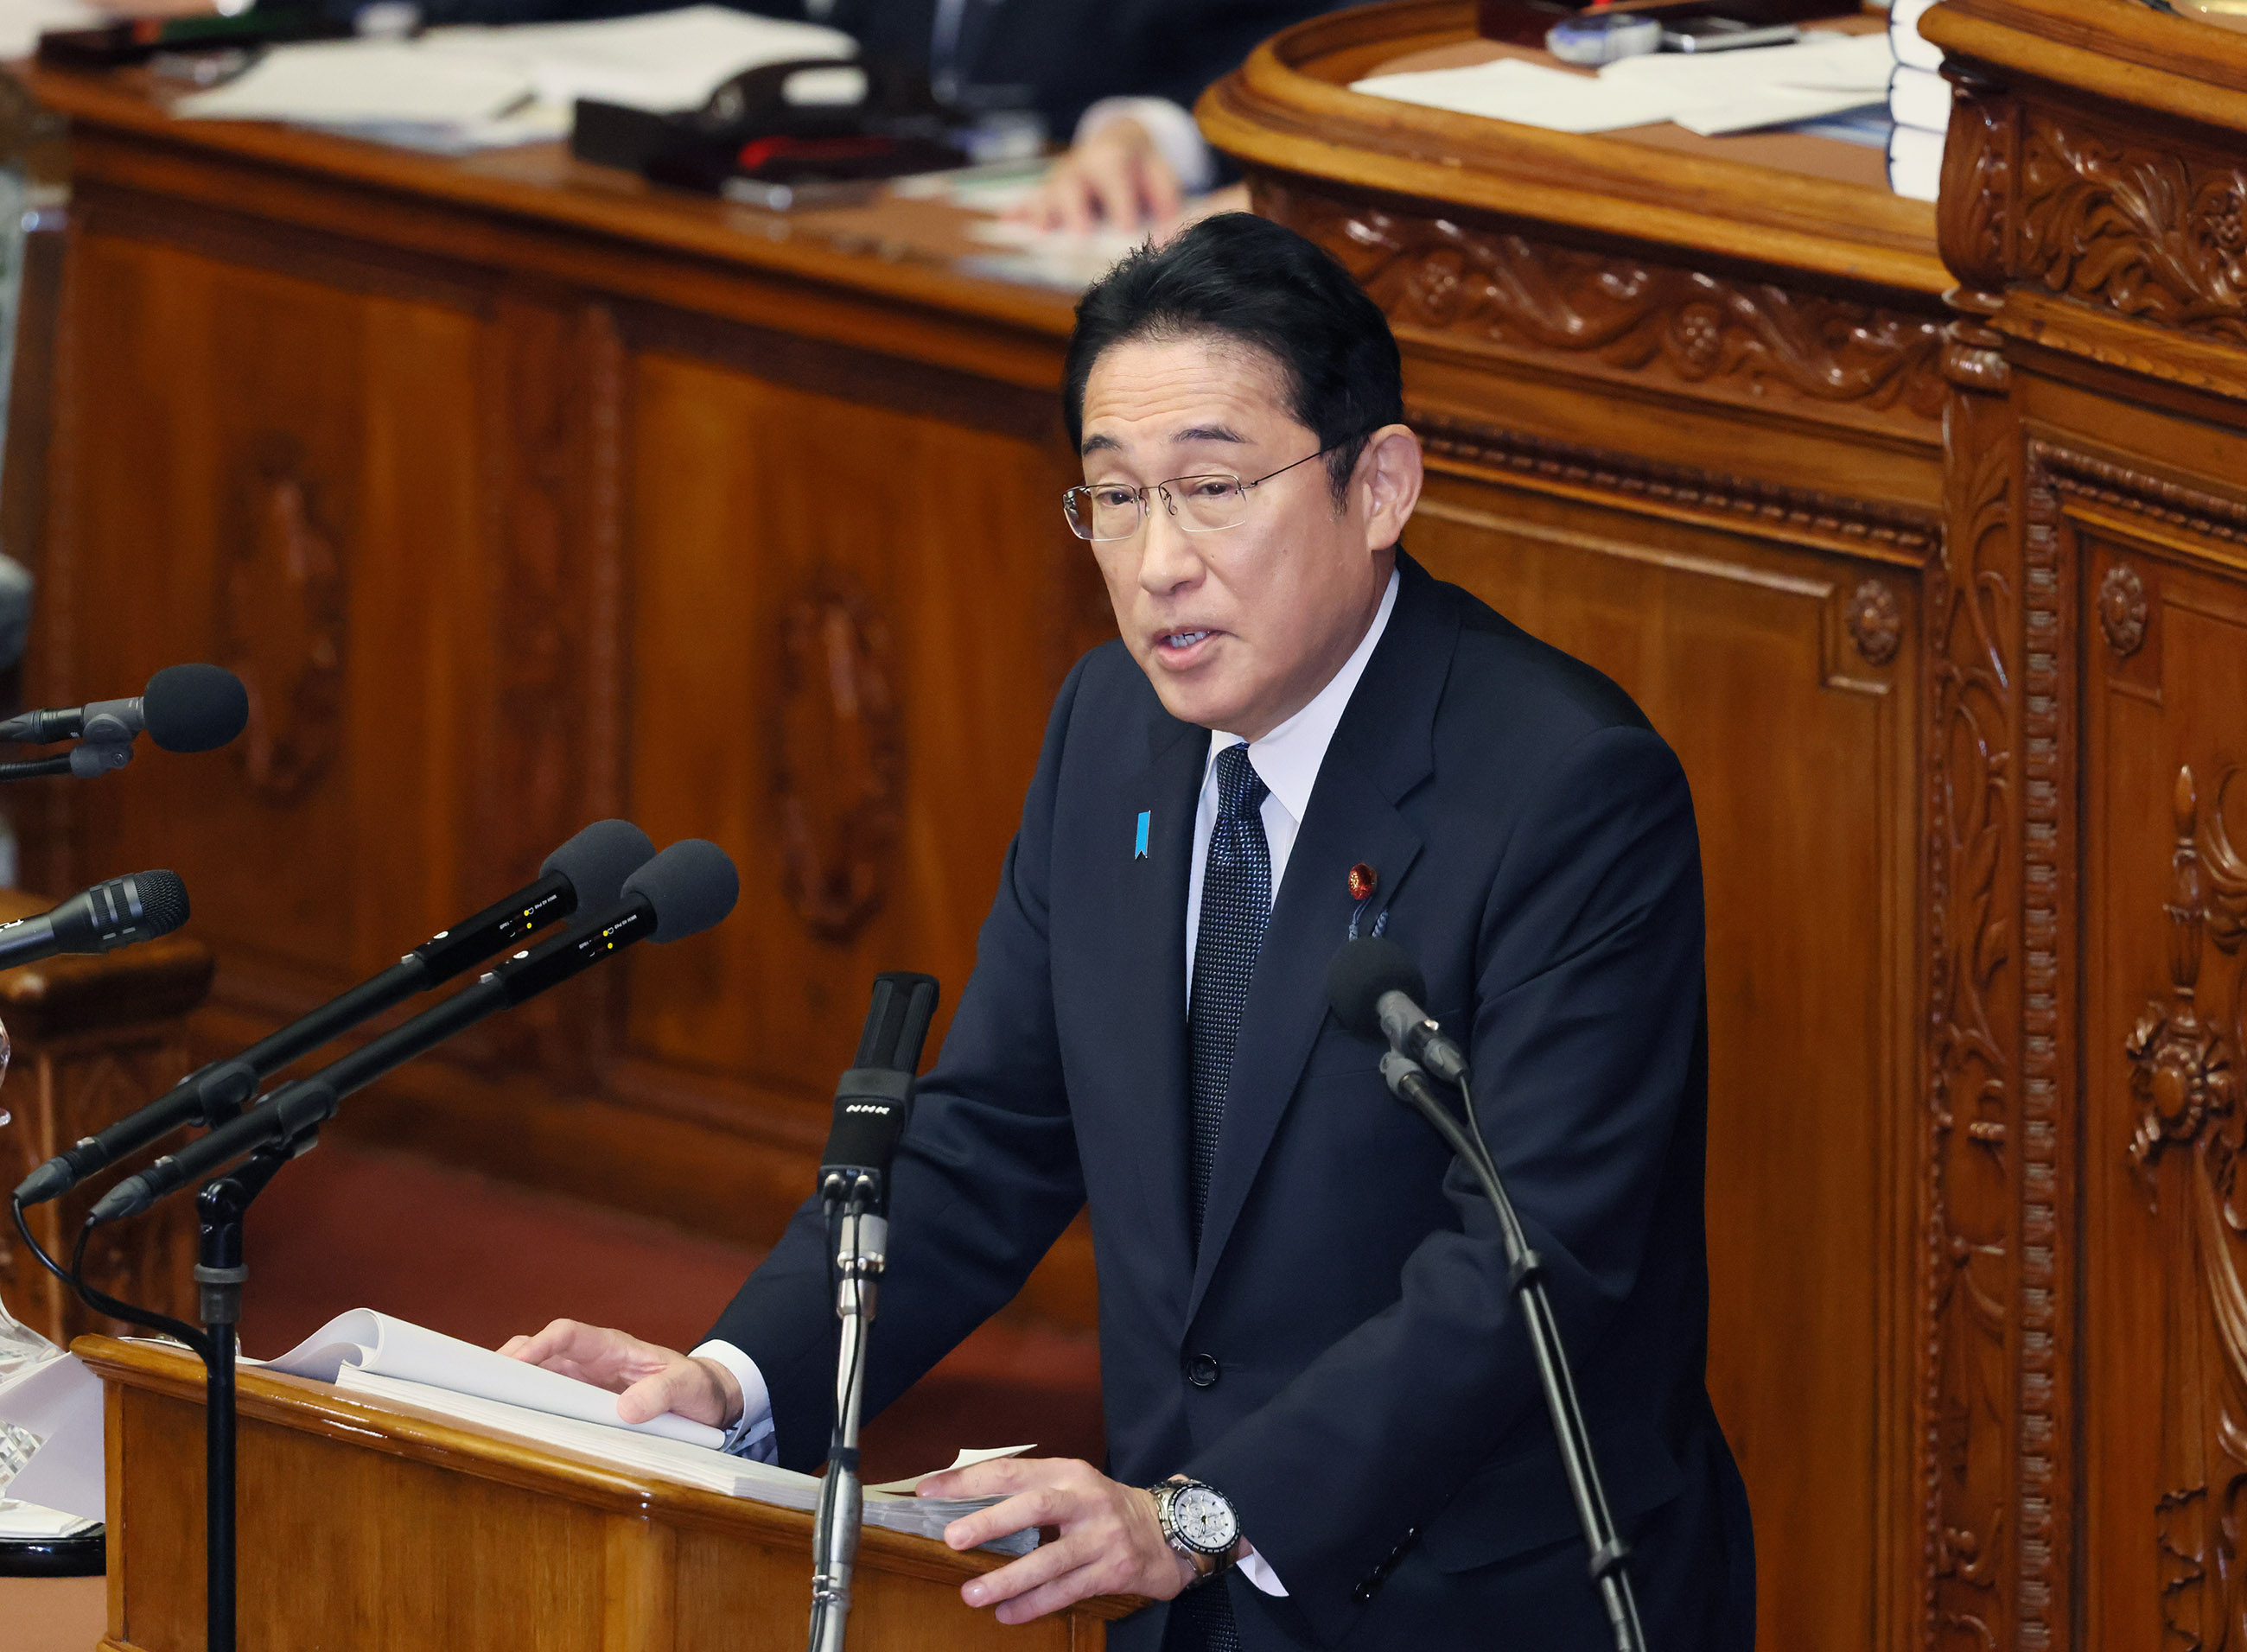 Prime Minister Kishida delivering a policy speech during the plenary session of the House of Representatives (8)